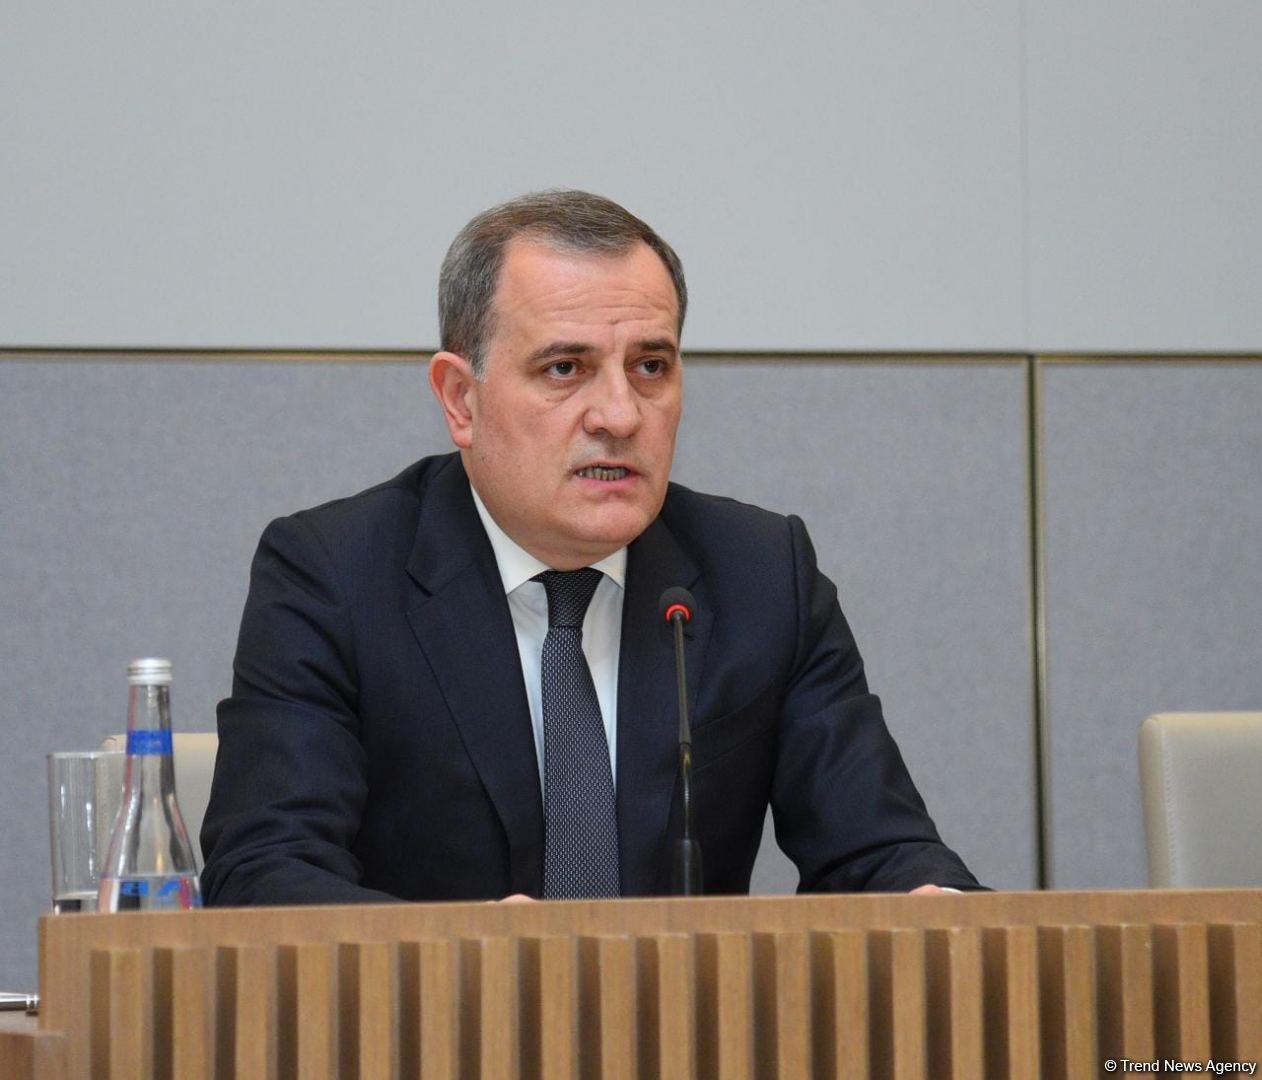 Jewish people and Azerbaijanis live together in peace for many years - FM